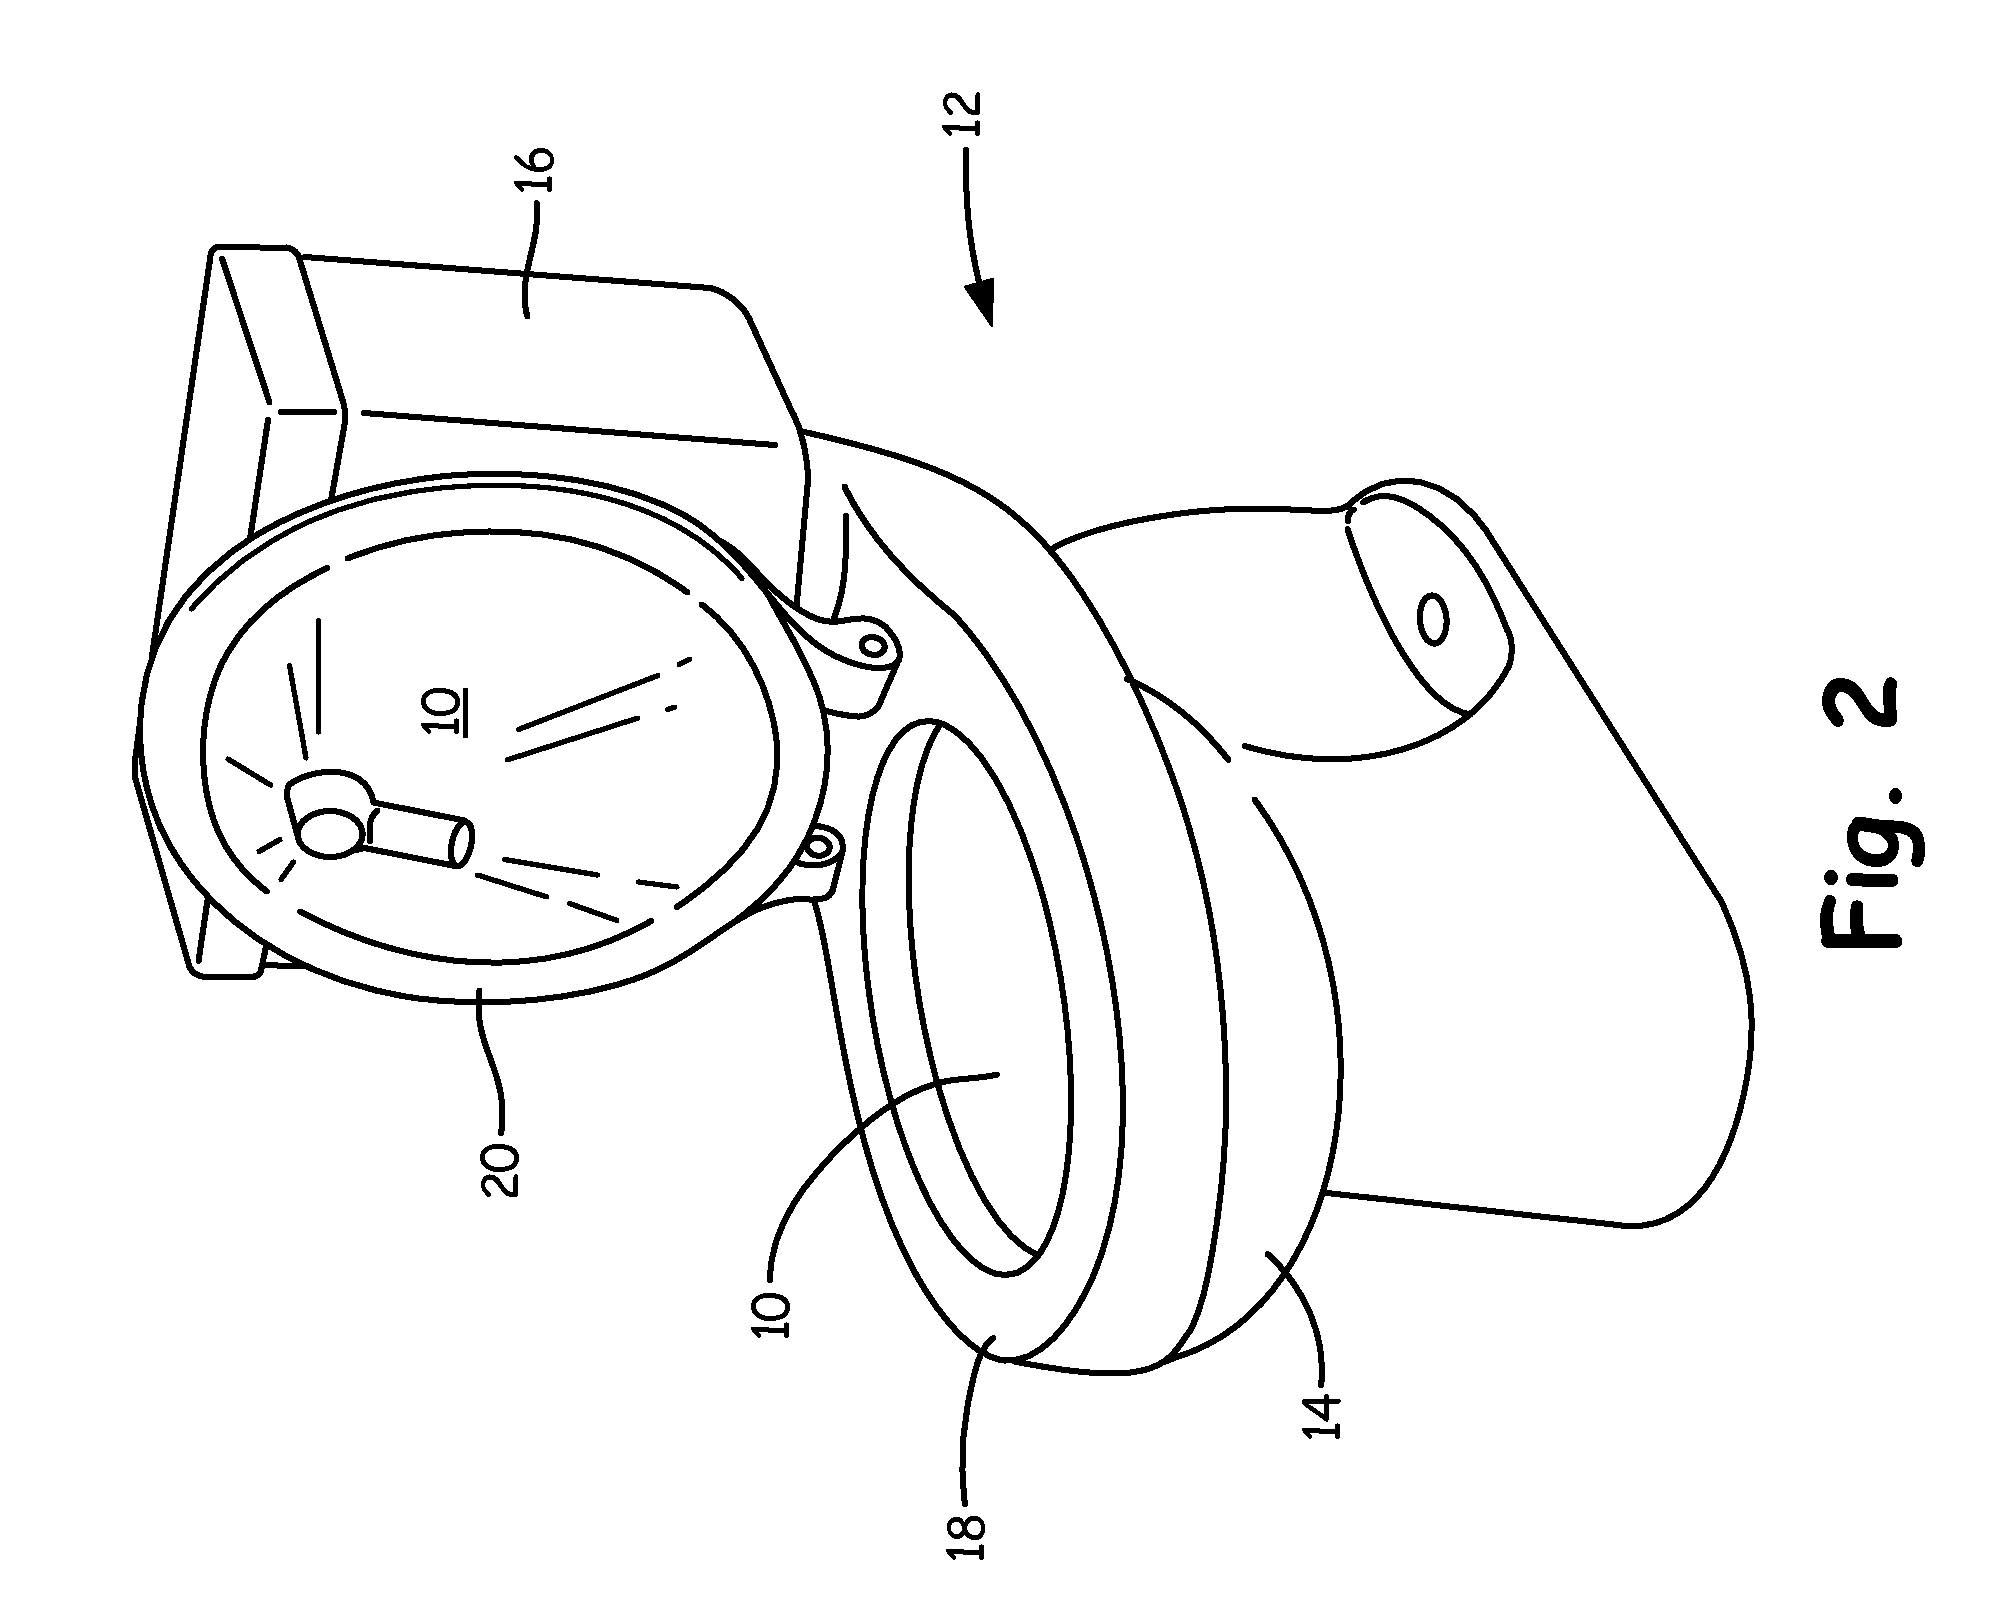 Urine sample collection device